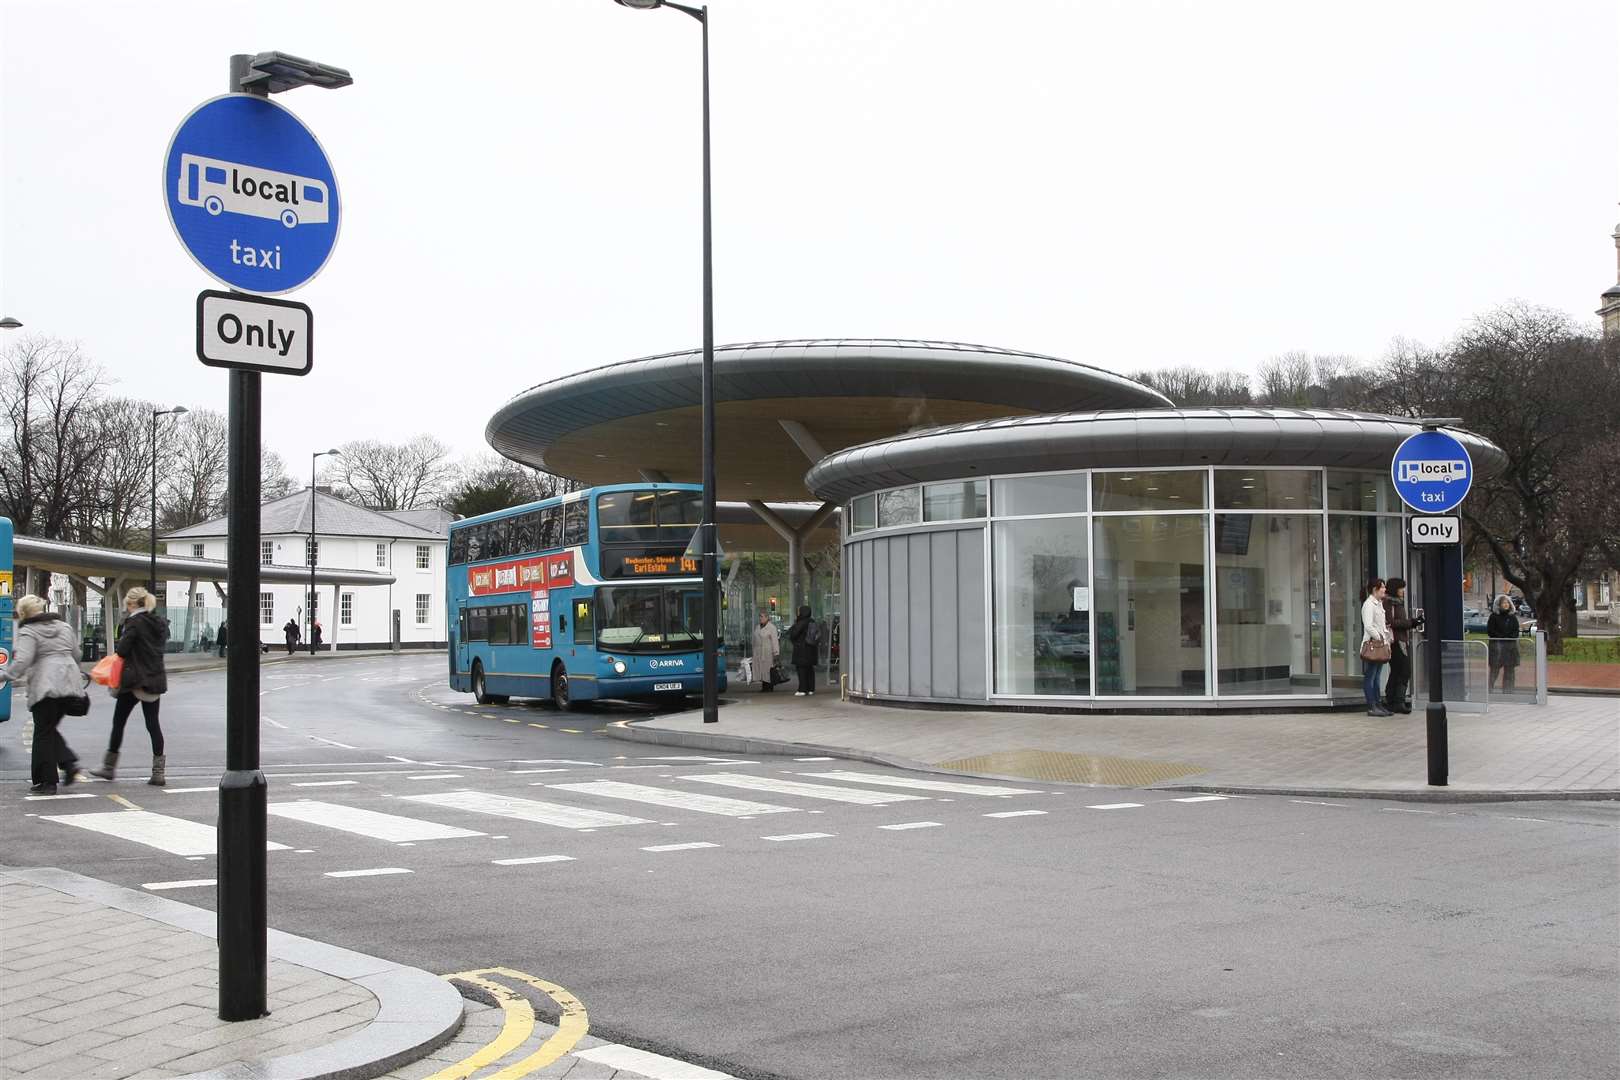 Mrs Archer was threatened with a £1,200 fine after driving her daughter through a bus lane in Waterfront Way, Chatham